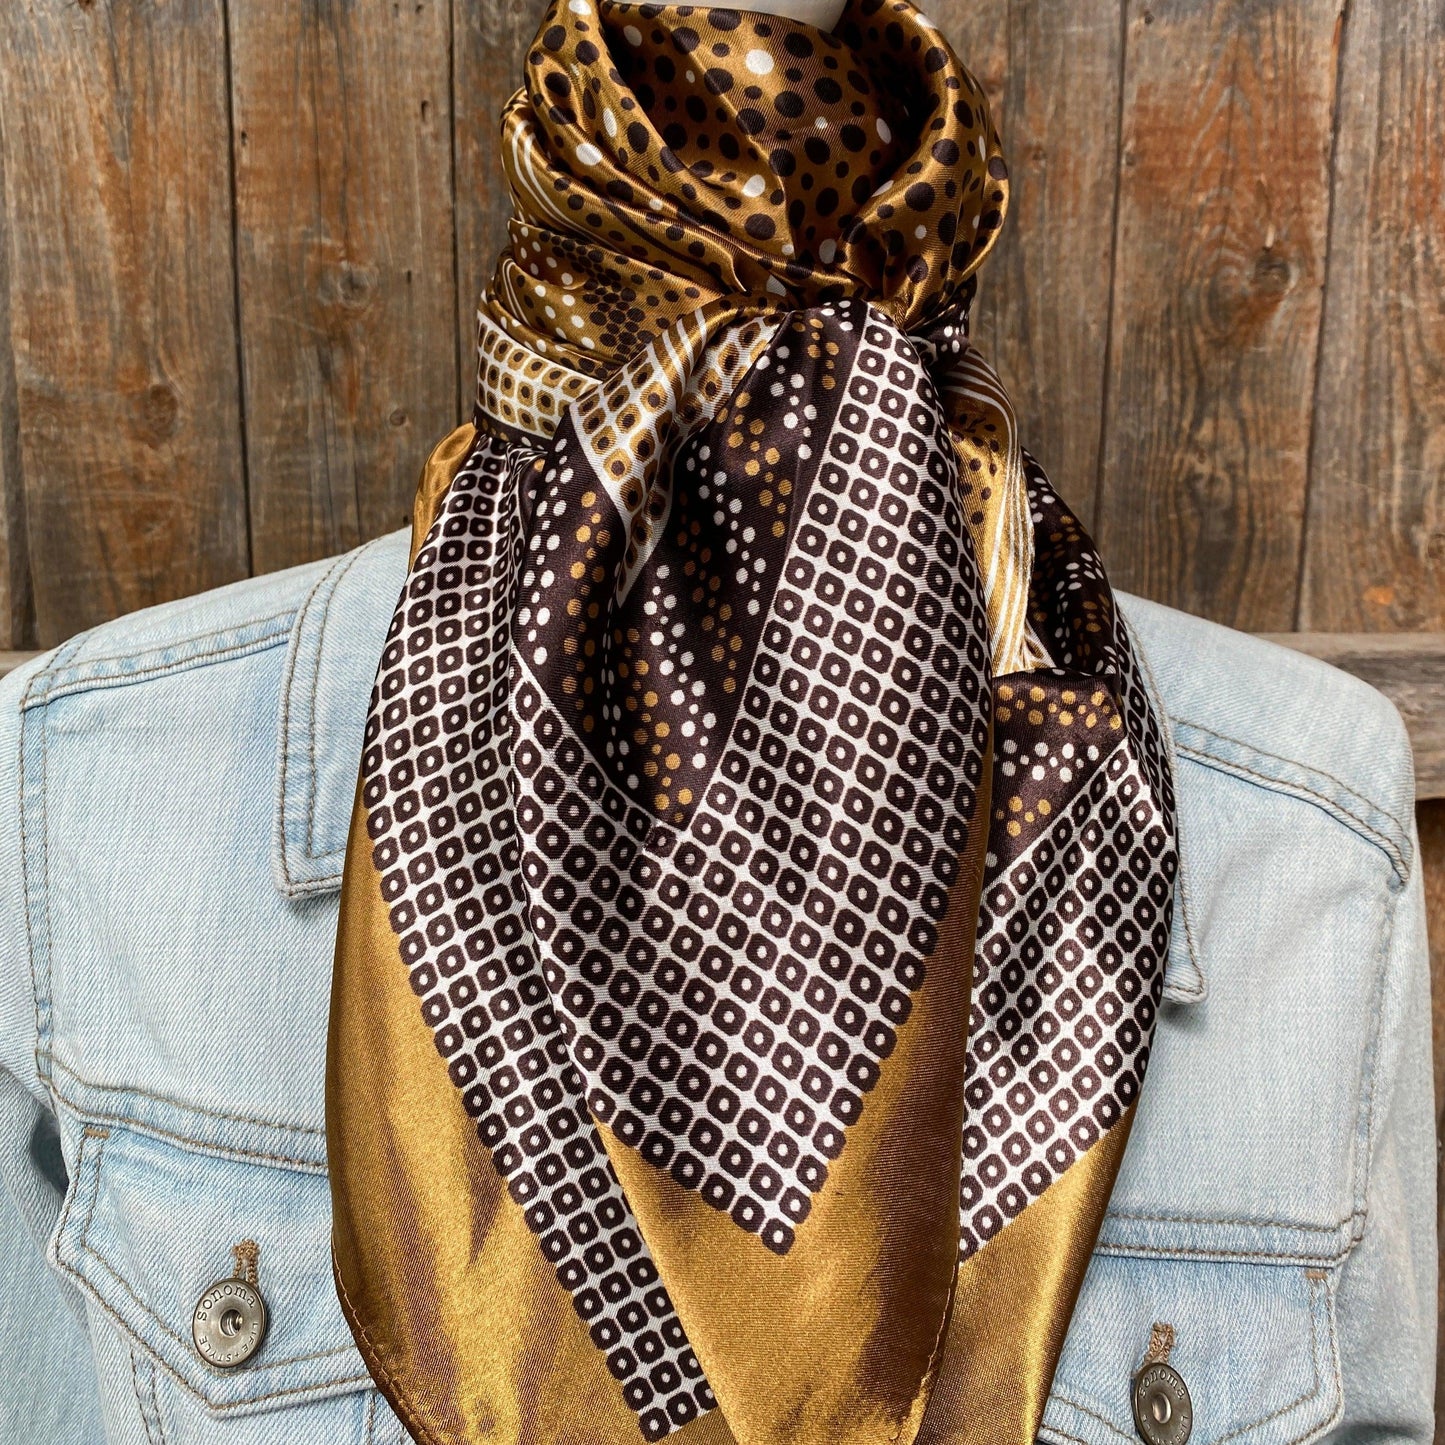 35X35" Gold Dots & Squares Wild Rag/Scarf WR3349 - RODEO DRIVE